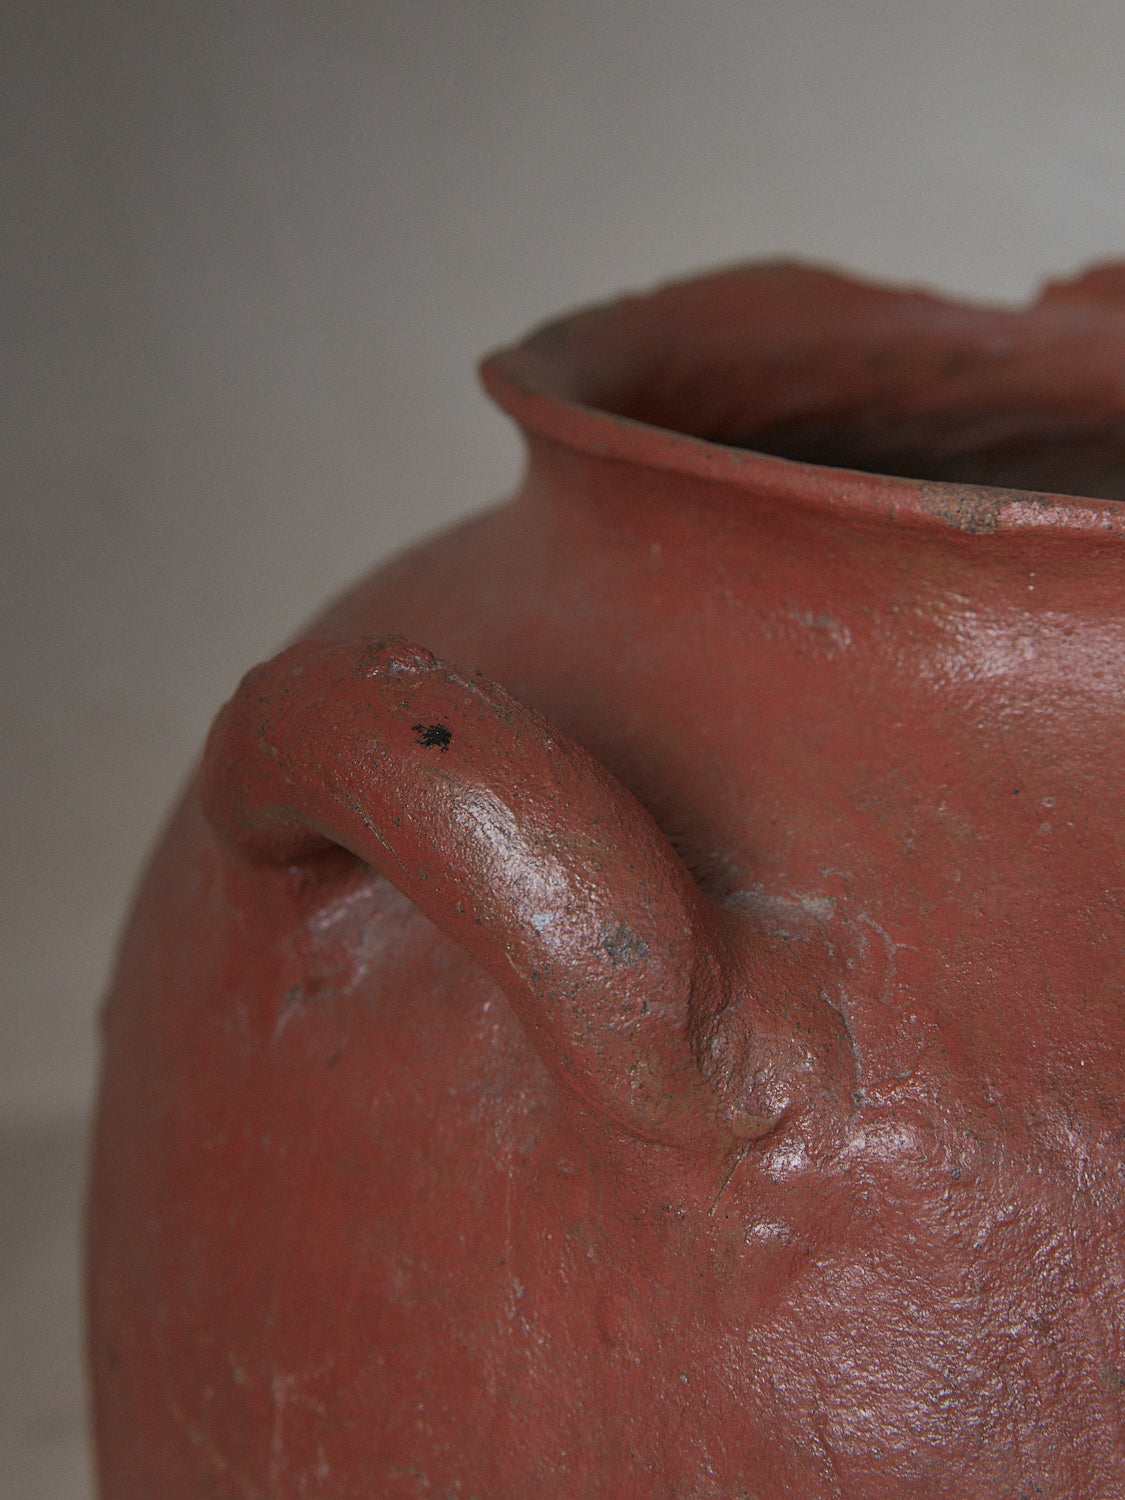 Vase Faris. Rare find. Large antique ceramic vase with round bodice, wide lip and low-sitting handle details at sides.